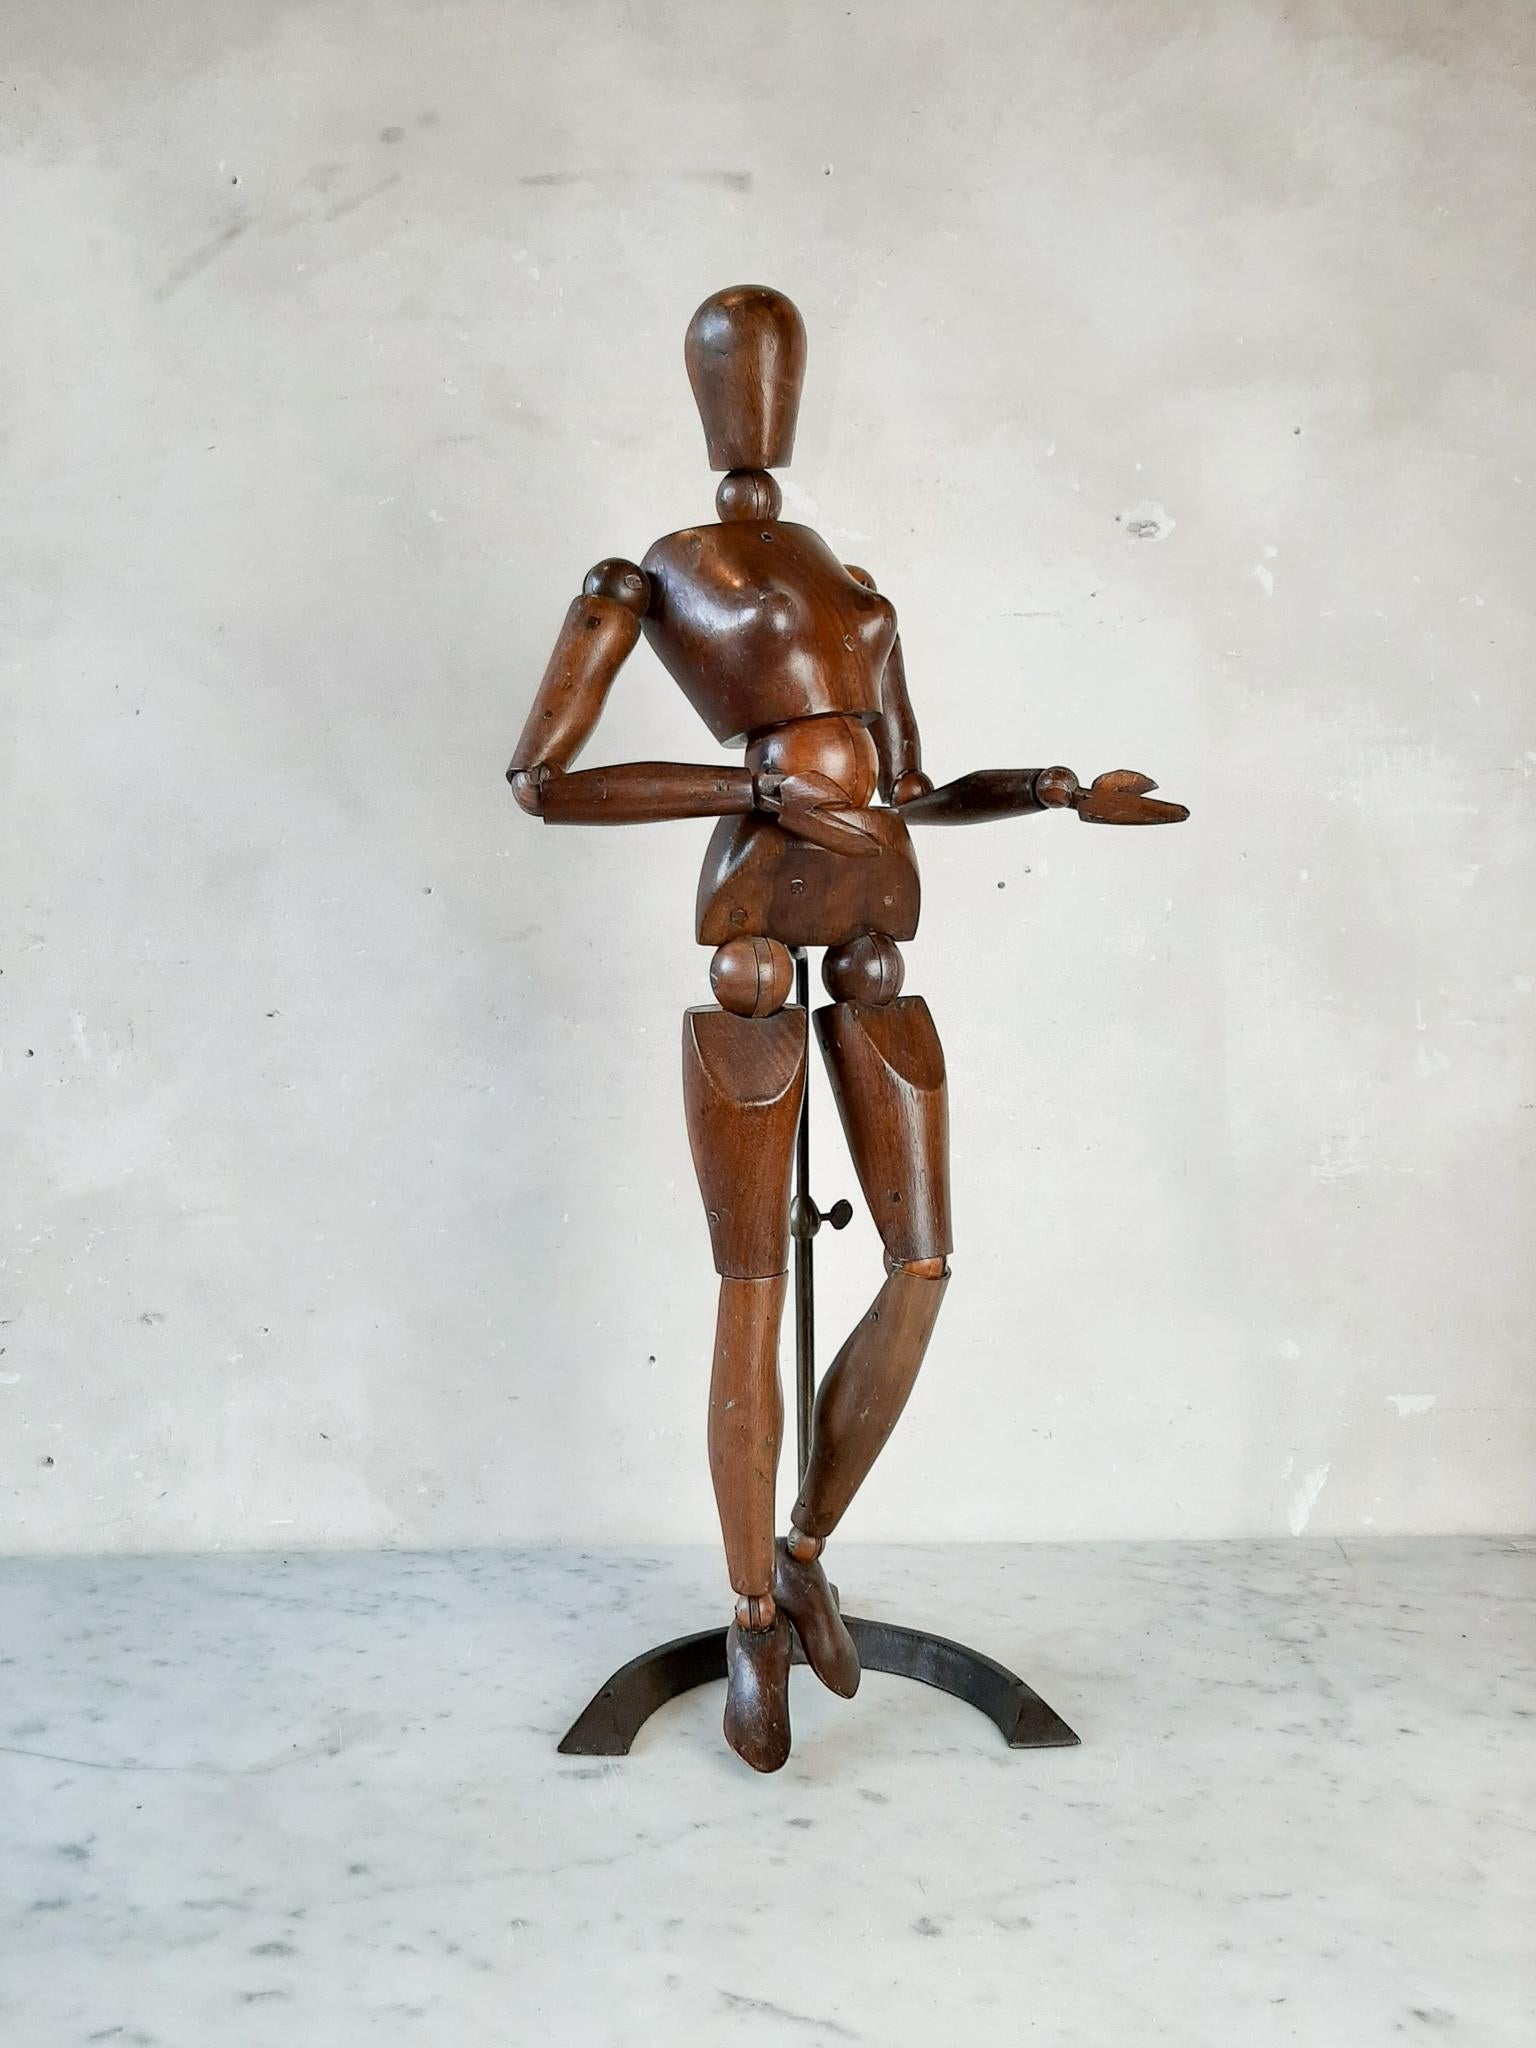 An antique female artist mannequin, 69 cm made in france in the 19th century. This elegant french mannequin is made of walnut wood and is held up by an adjustable metal stand in the shape of a horse shoe. 

